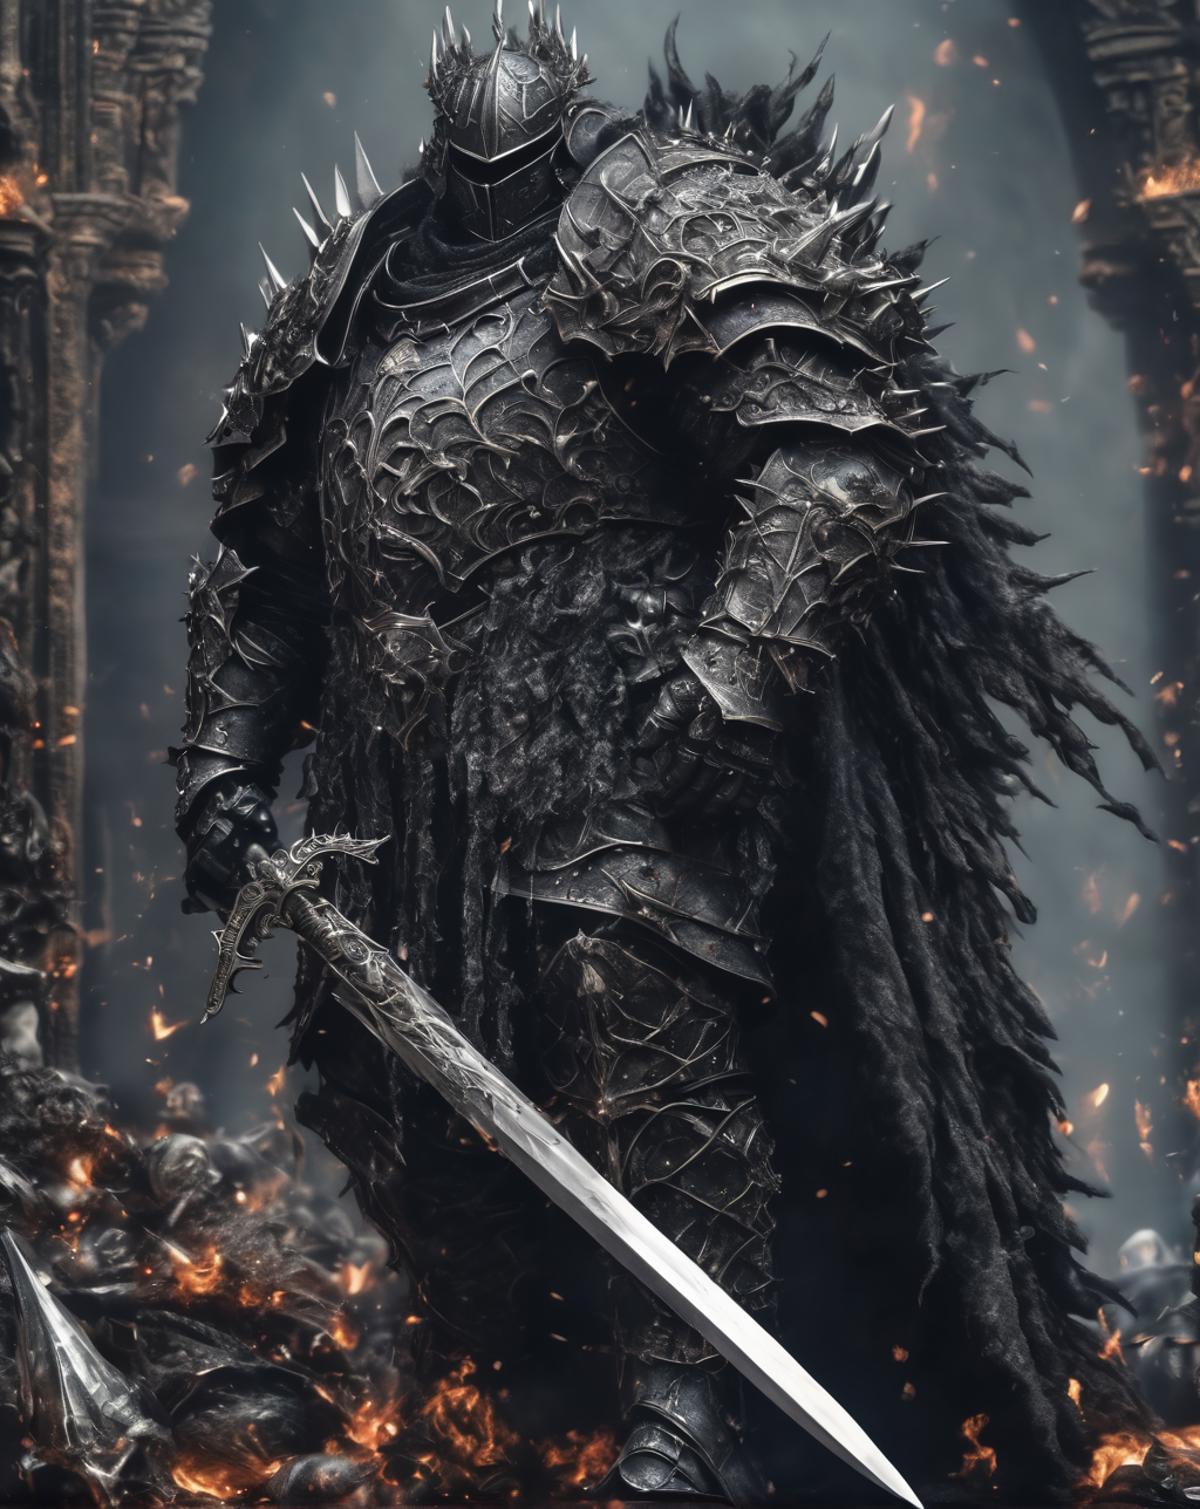 Image of a Warrior with a Sword and Spikes on His Armor.